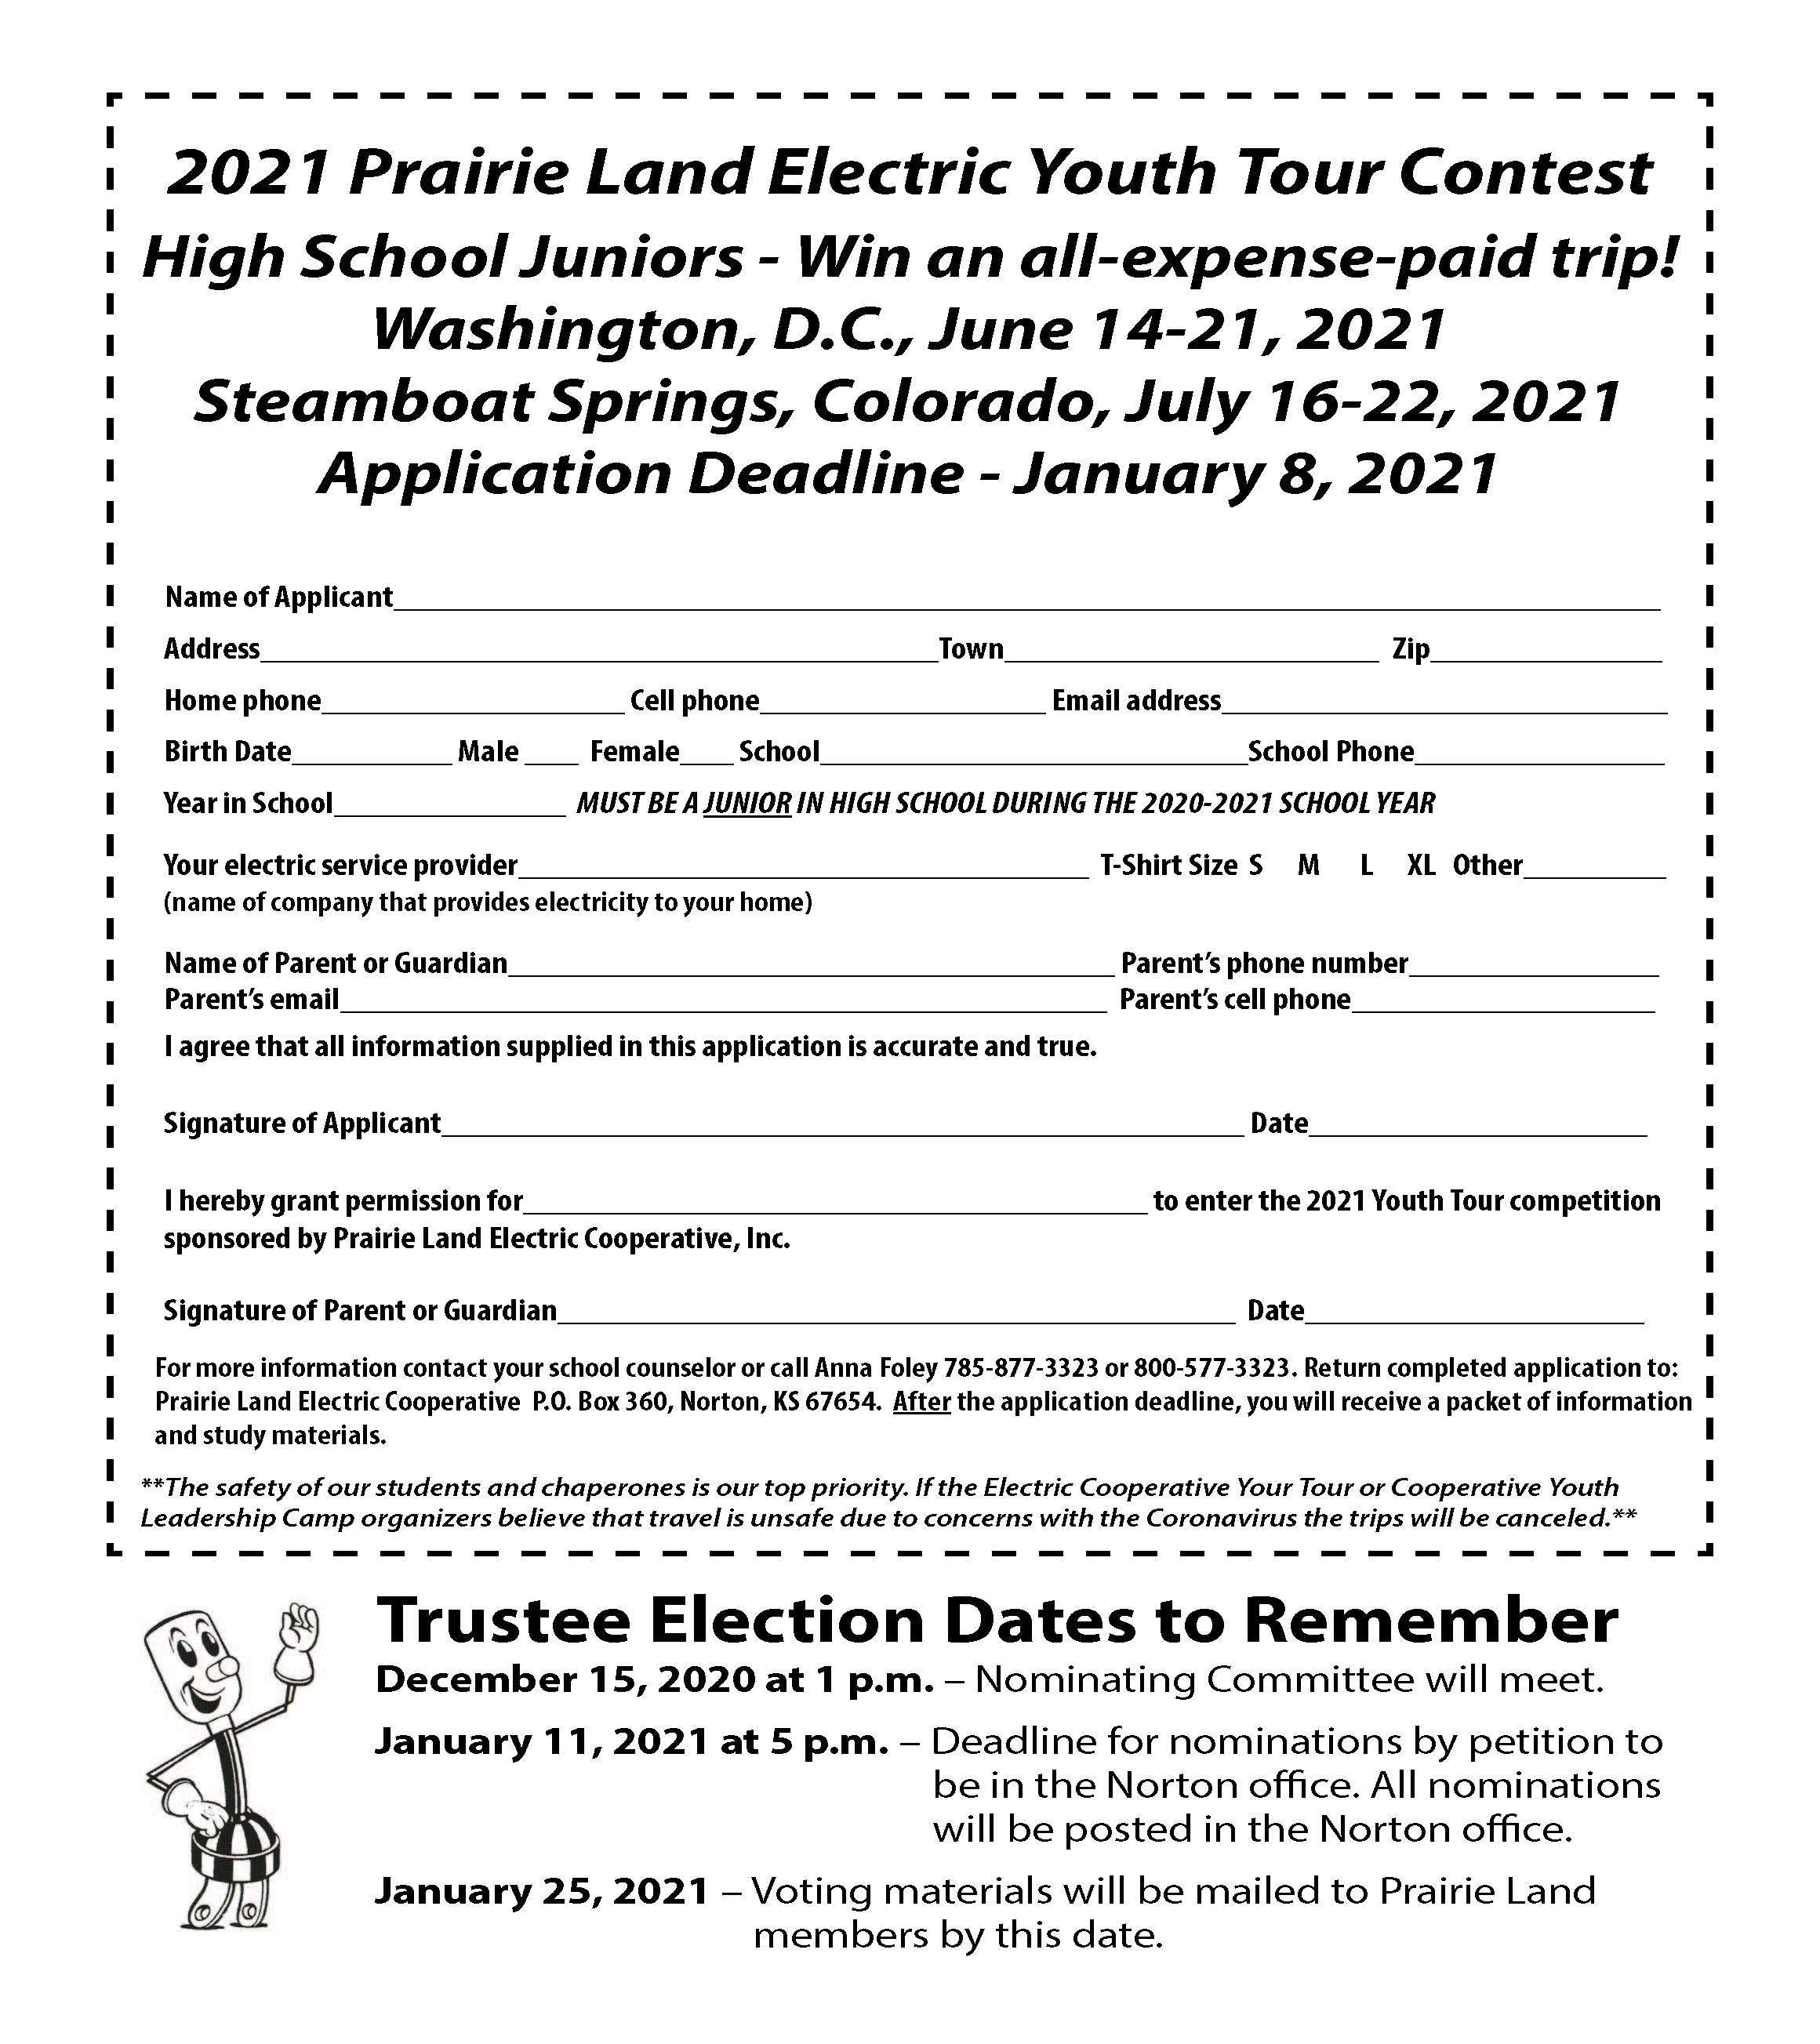 Youth Tour and Election Dates